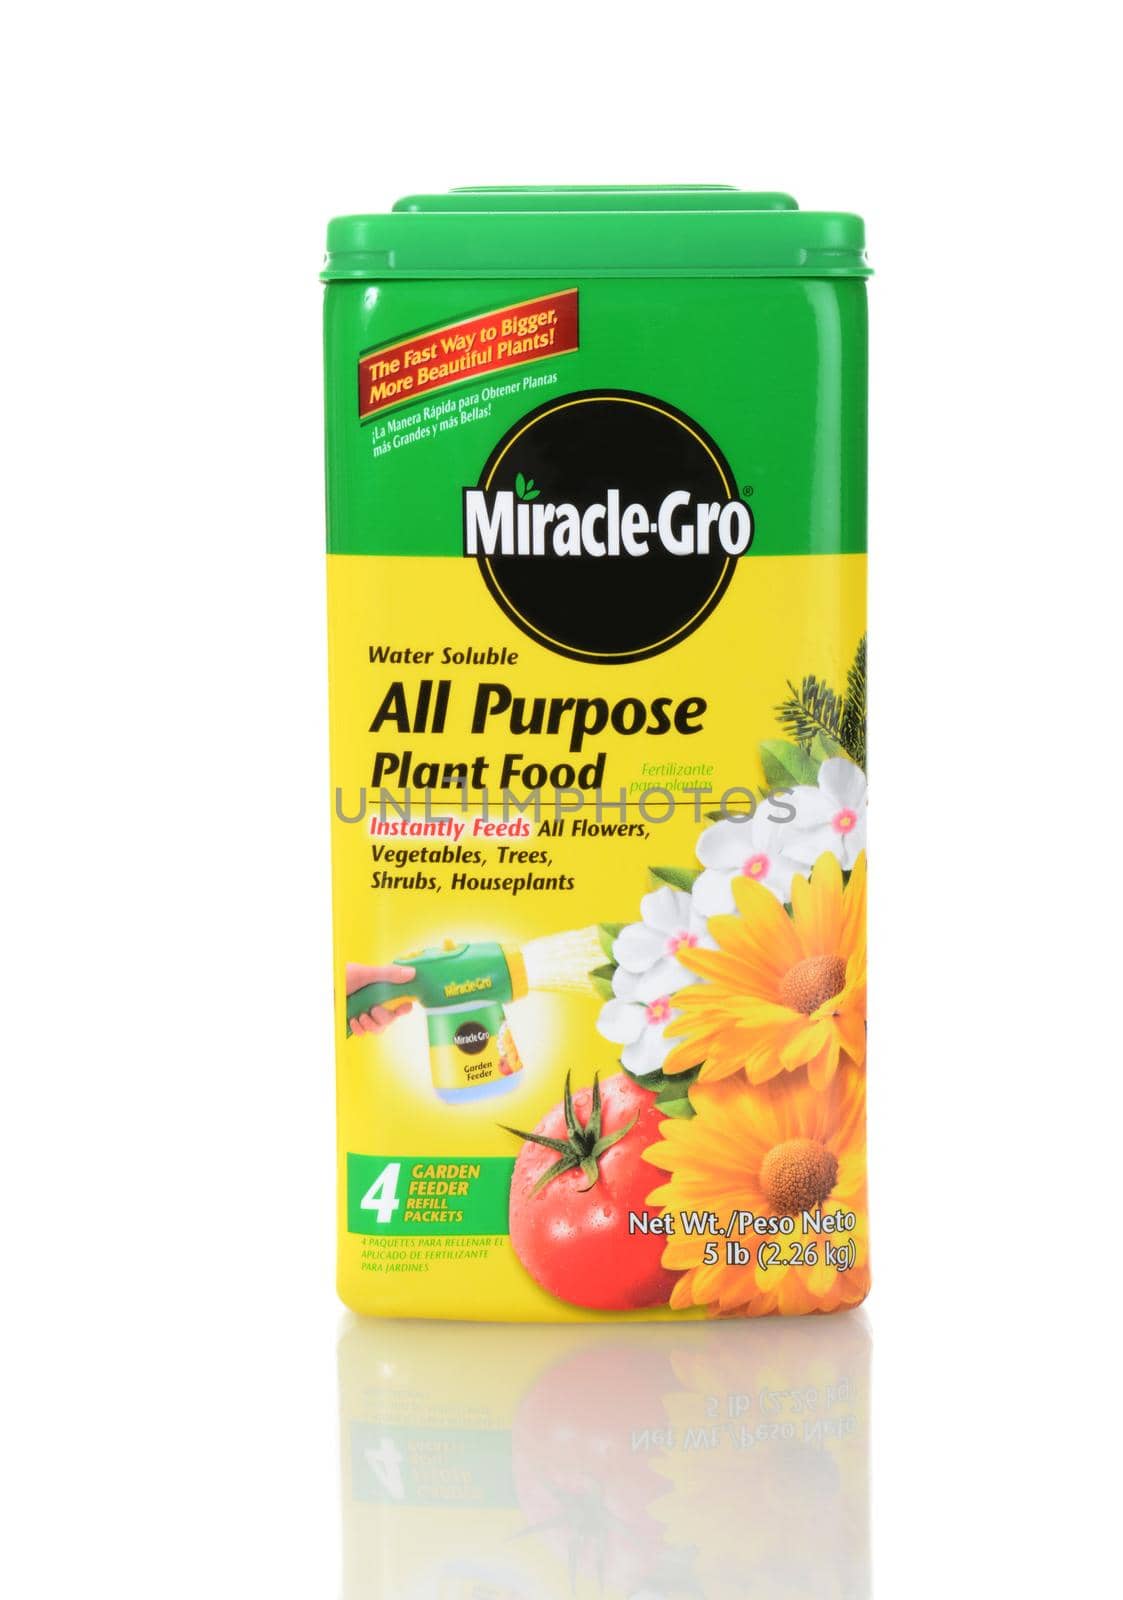 IRVINE, CALIFORNIA - JUNE 26, 2014: A box of Miracle-Gro Al Puropse Plant Food. From Scotts an industry leader in the lawn and garden market. 